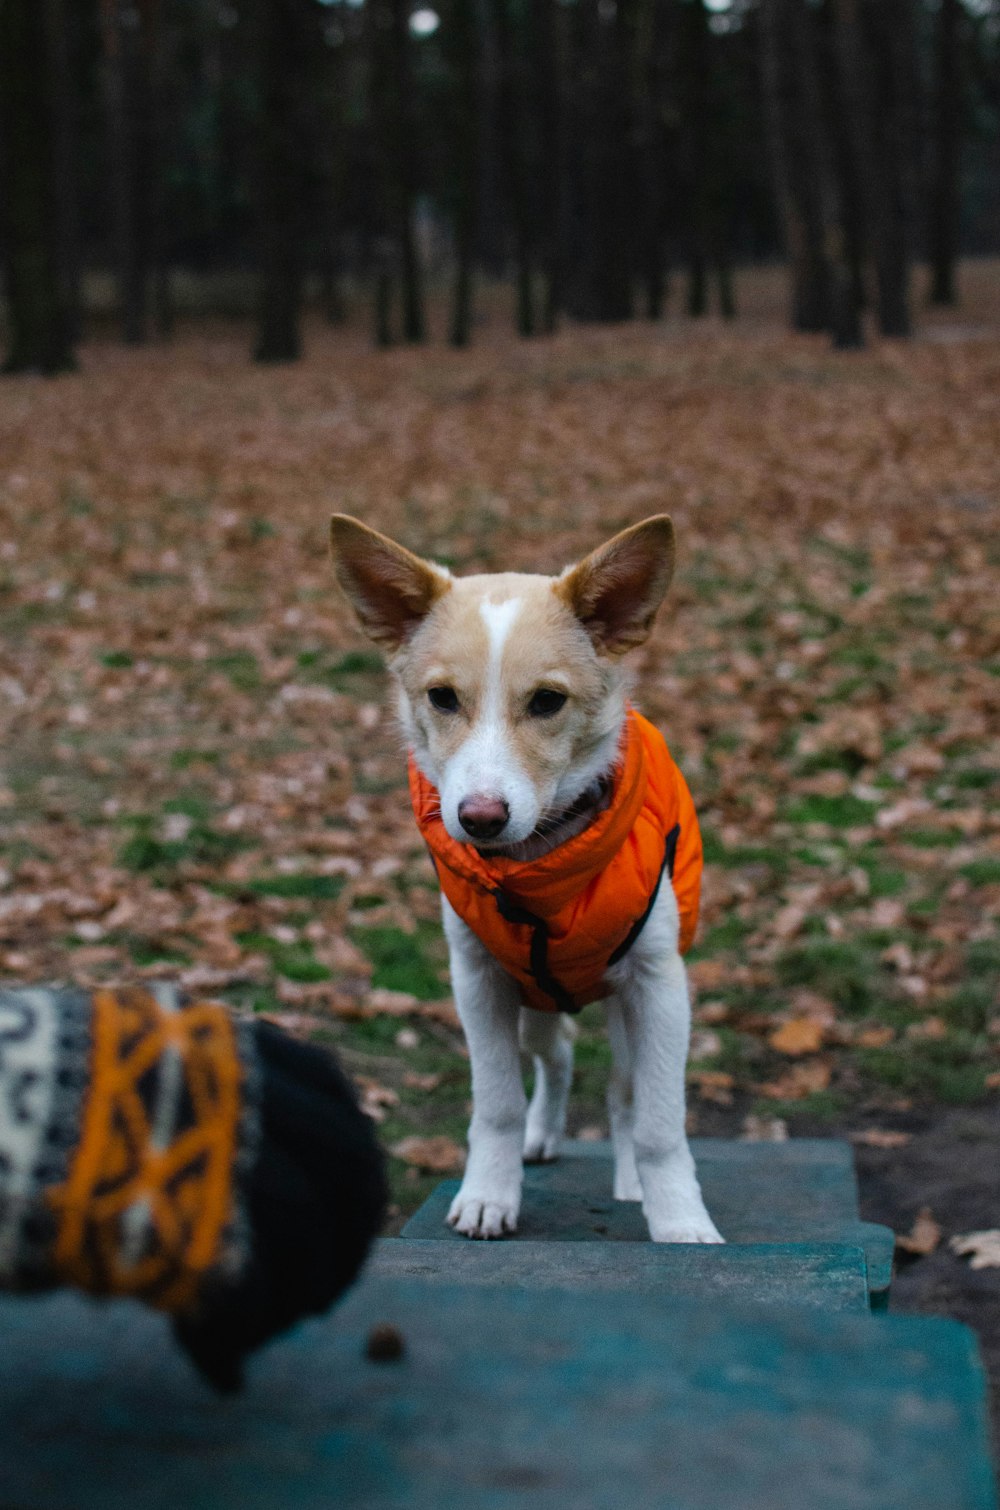 a small dog wearing an orange vest standing next to a skateboard